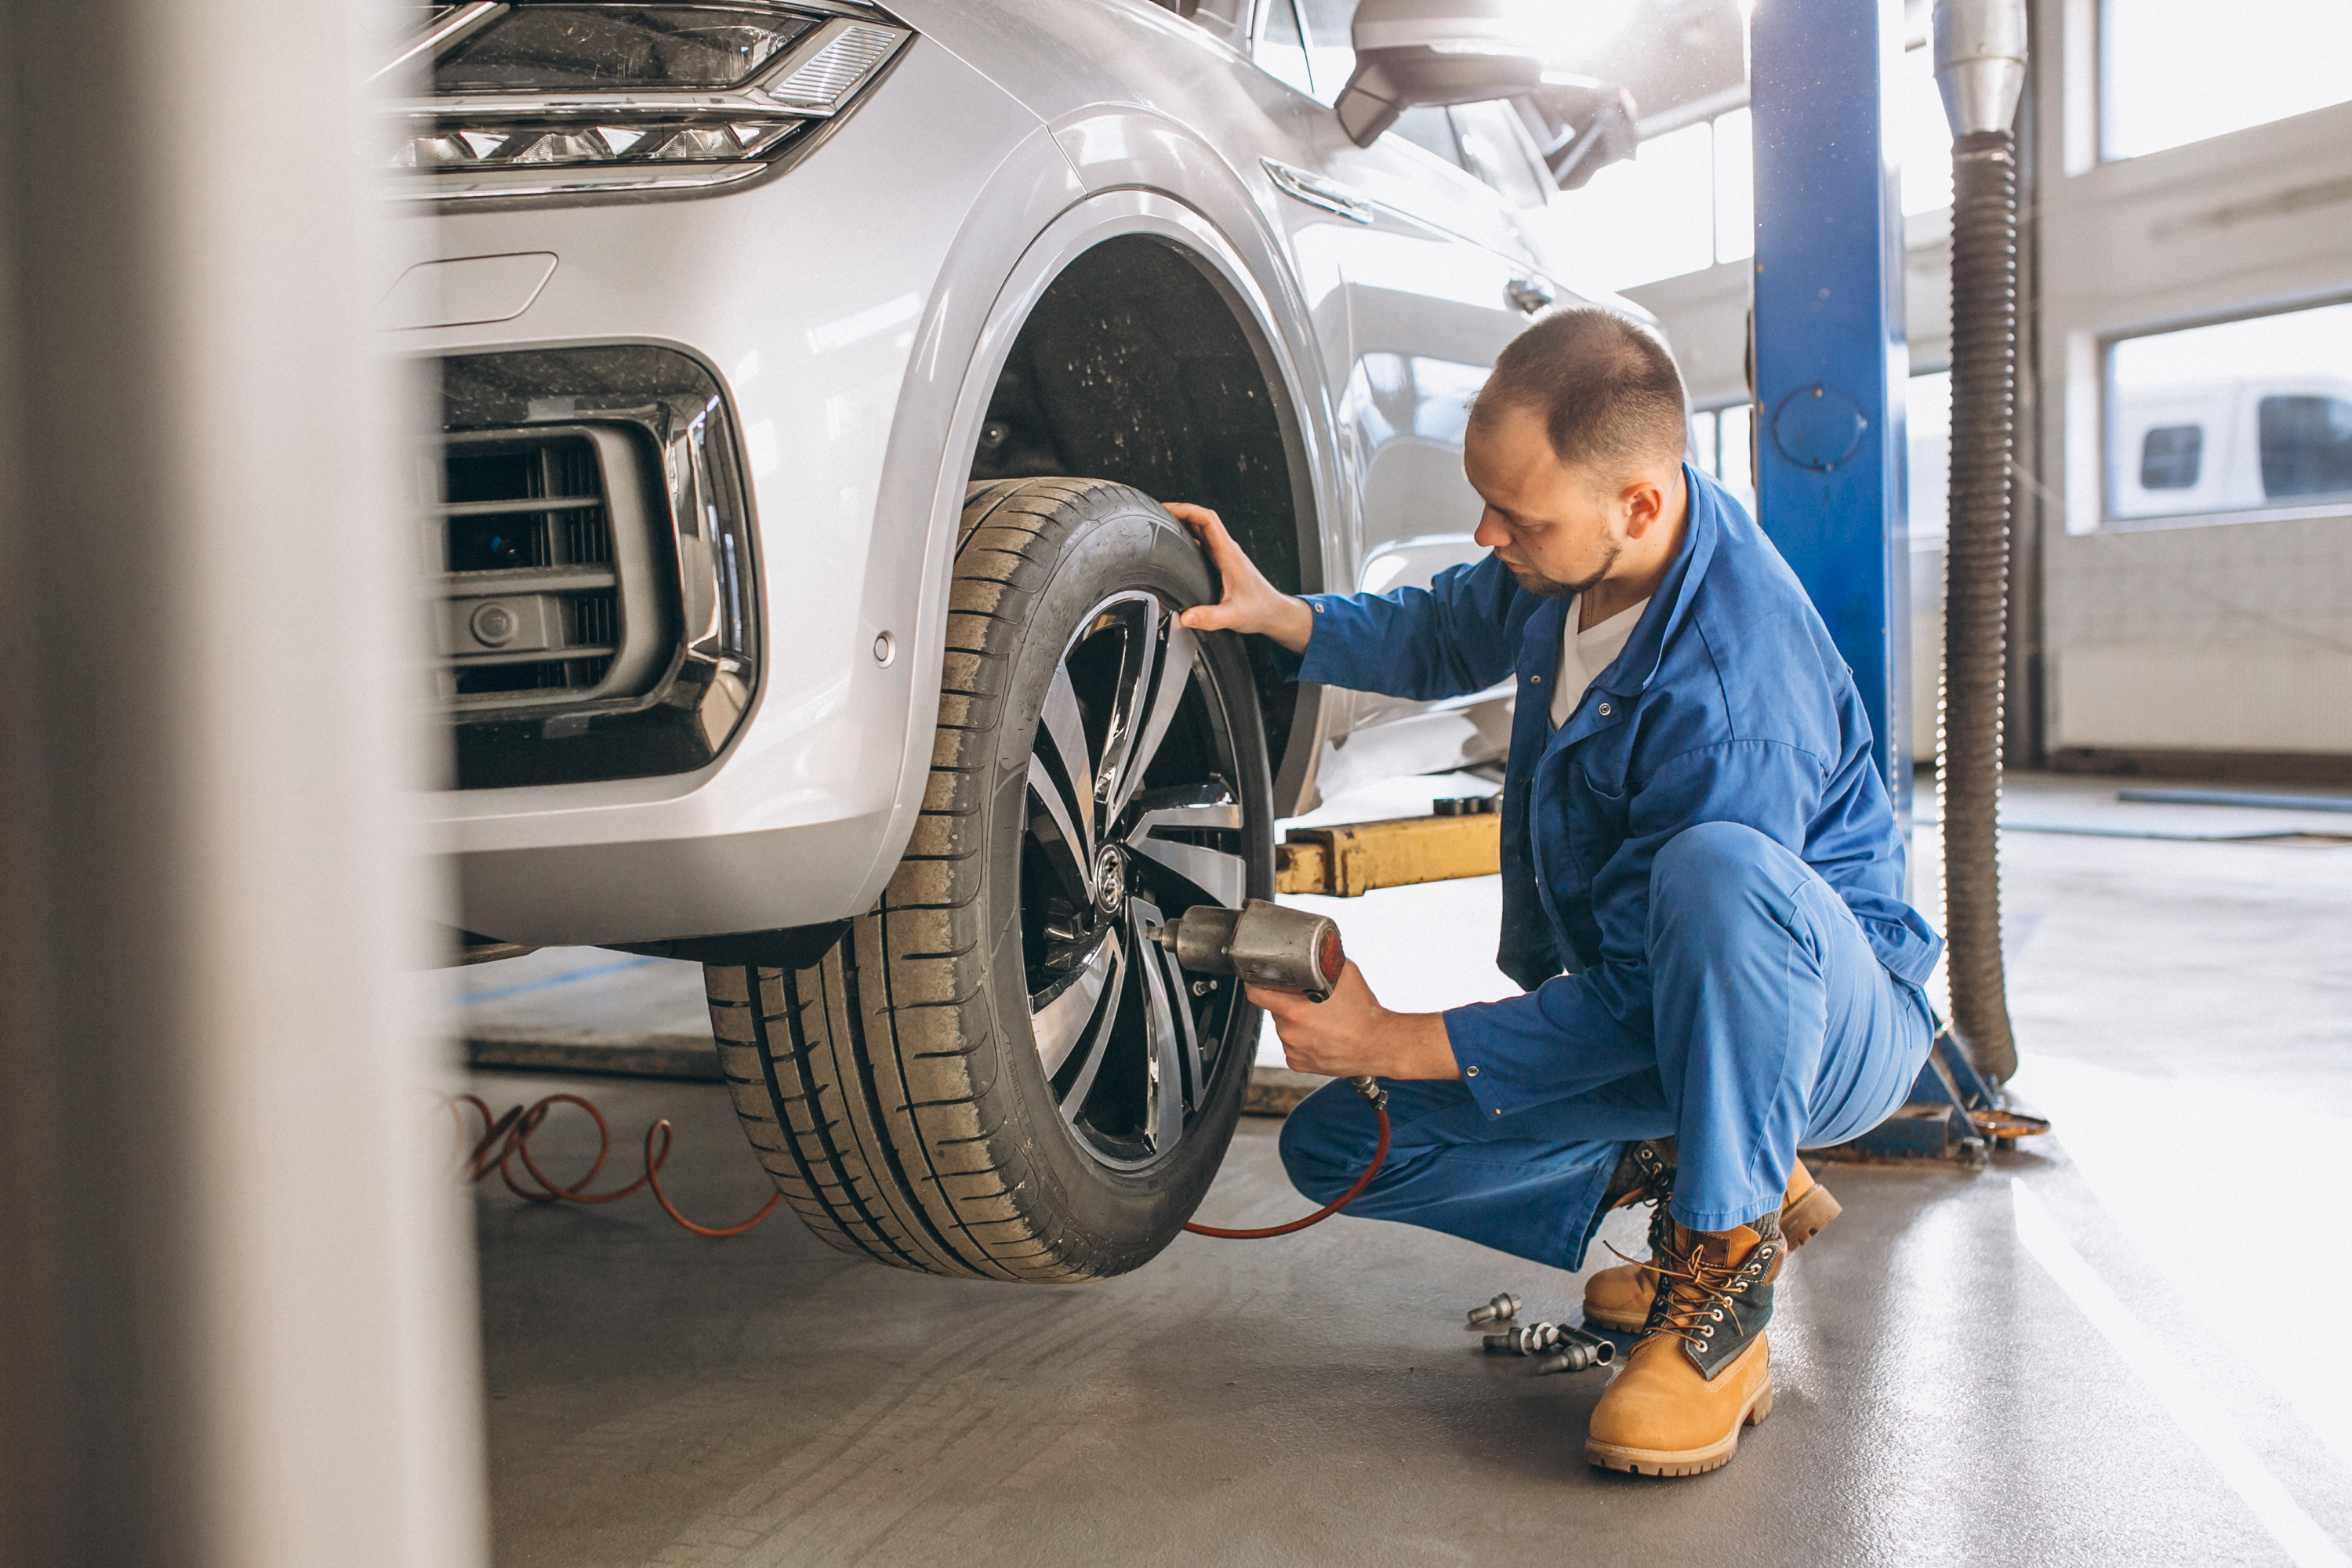 Man using a tool to assess a lifted vehicle's suspension system around the tire.